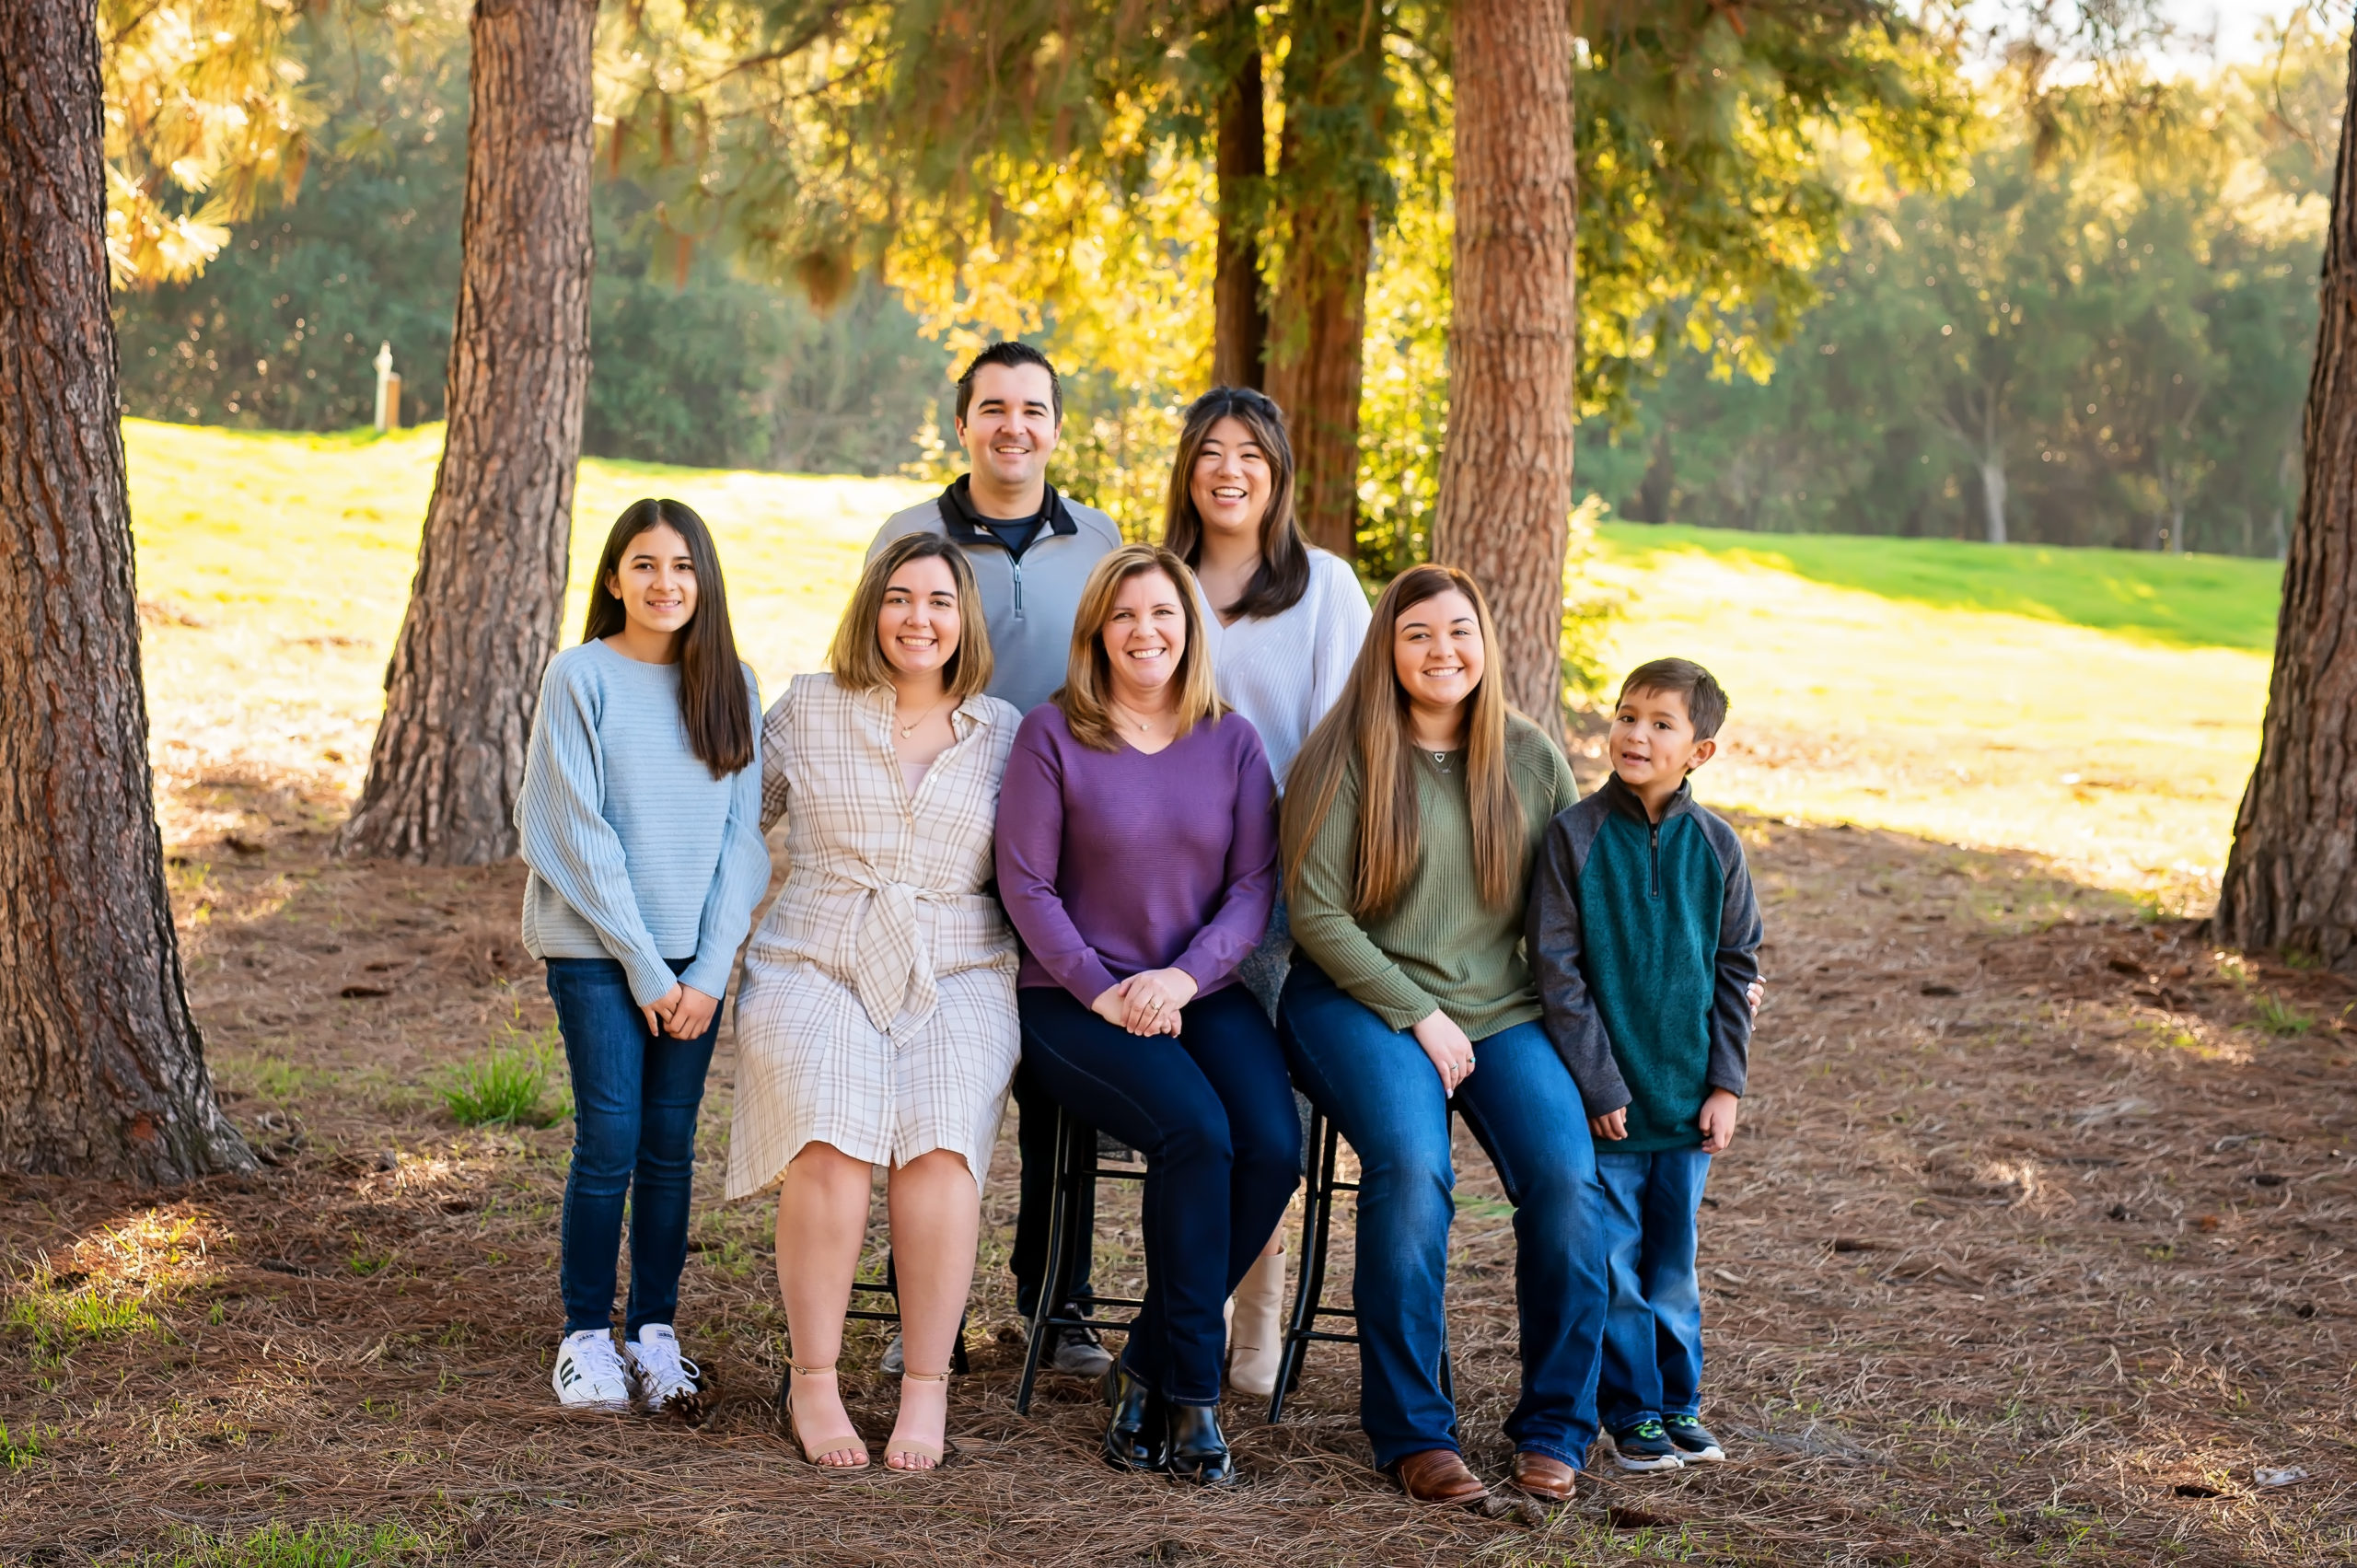 Tips for Group Poses and Family Posing | Big family photos, Large family  photos, Large family poses